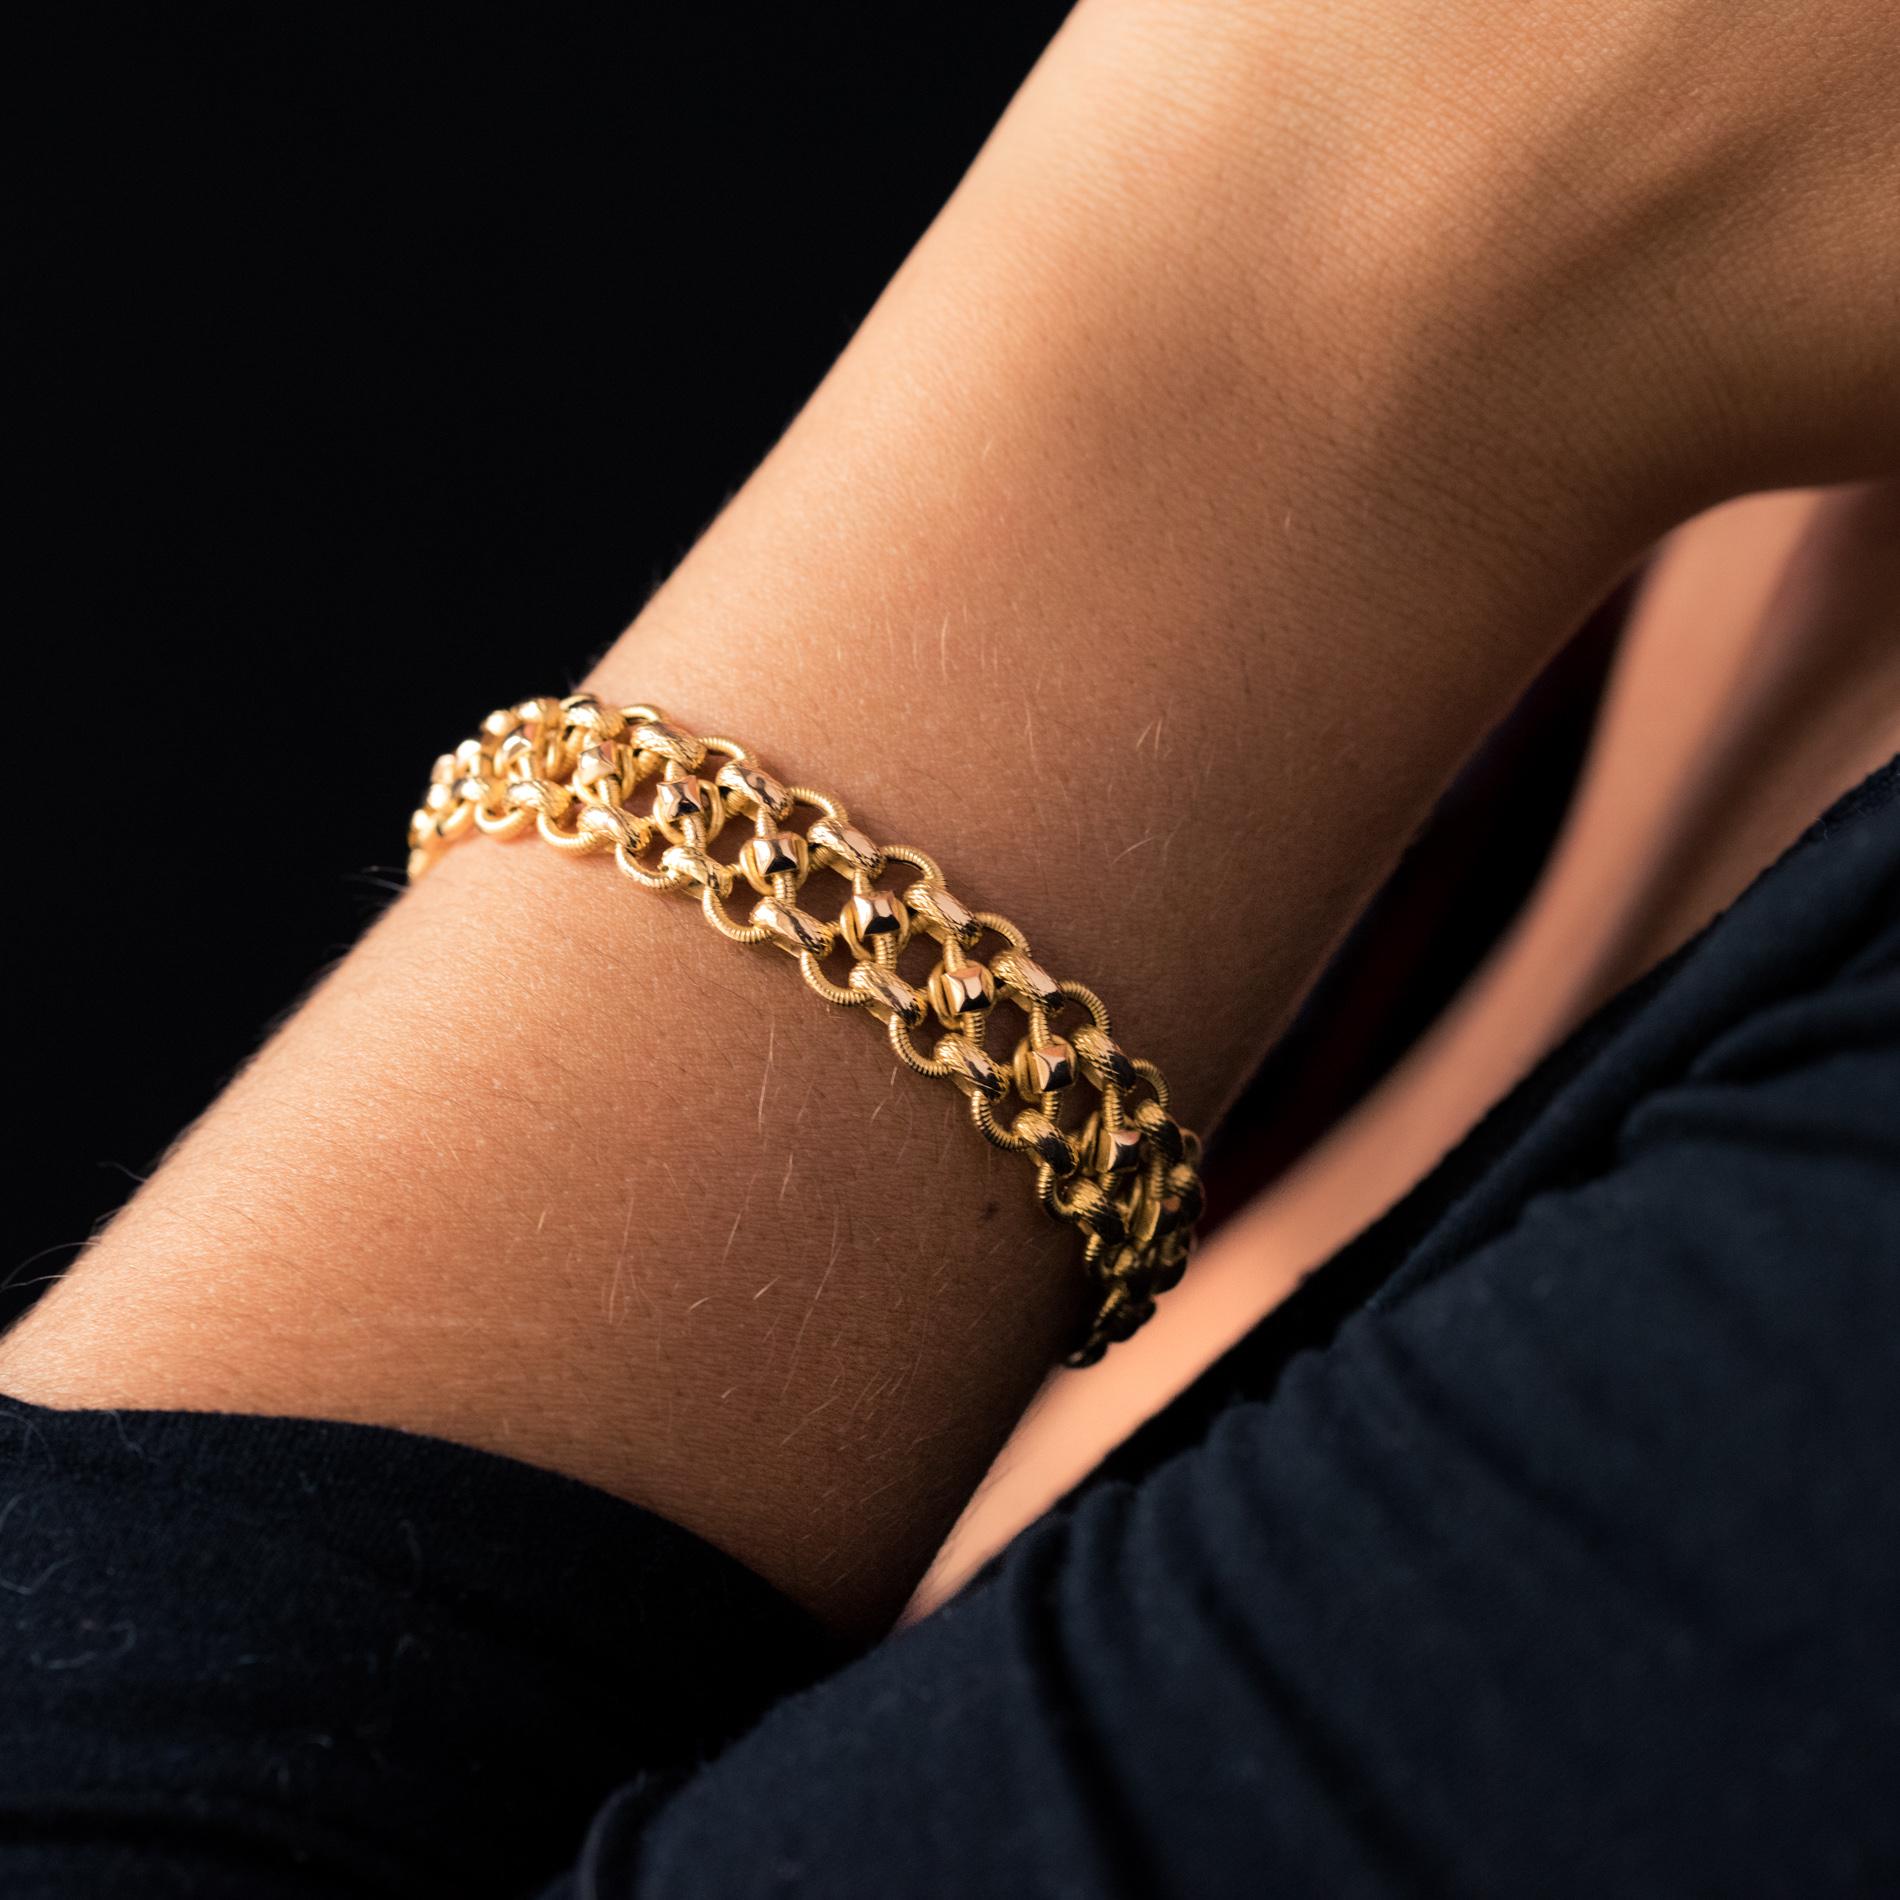 Bracelet in 18 karat yellow gold, rhinoceros head hallmark.
Lovely antique curb chain, it is made up of 8 chiseled patterns attached to each other by two gold staples, also chiseled and set with a small rose gold nail. The clasp is ratchet.
Length: